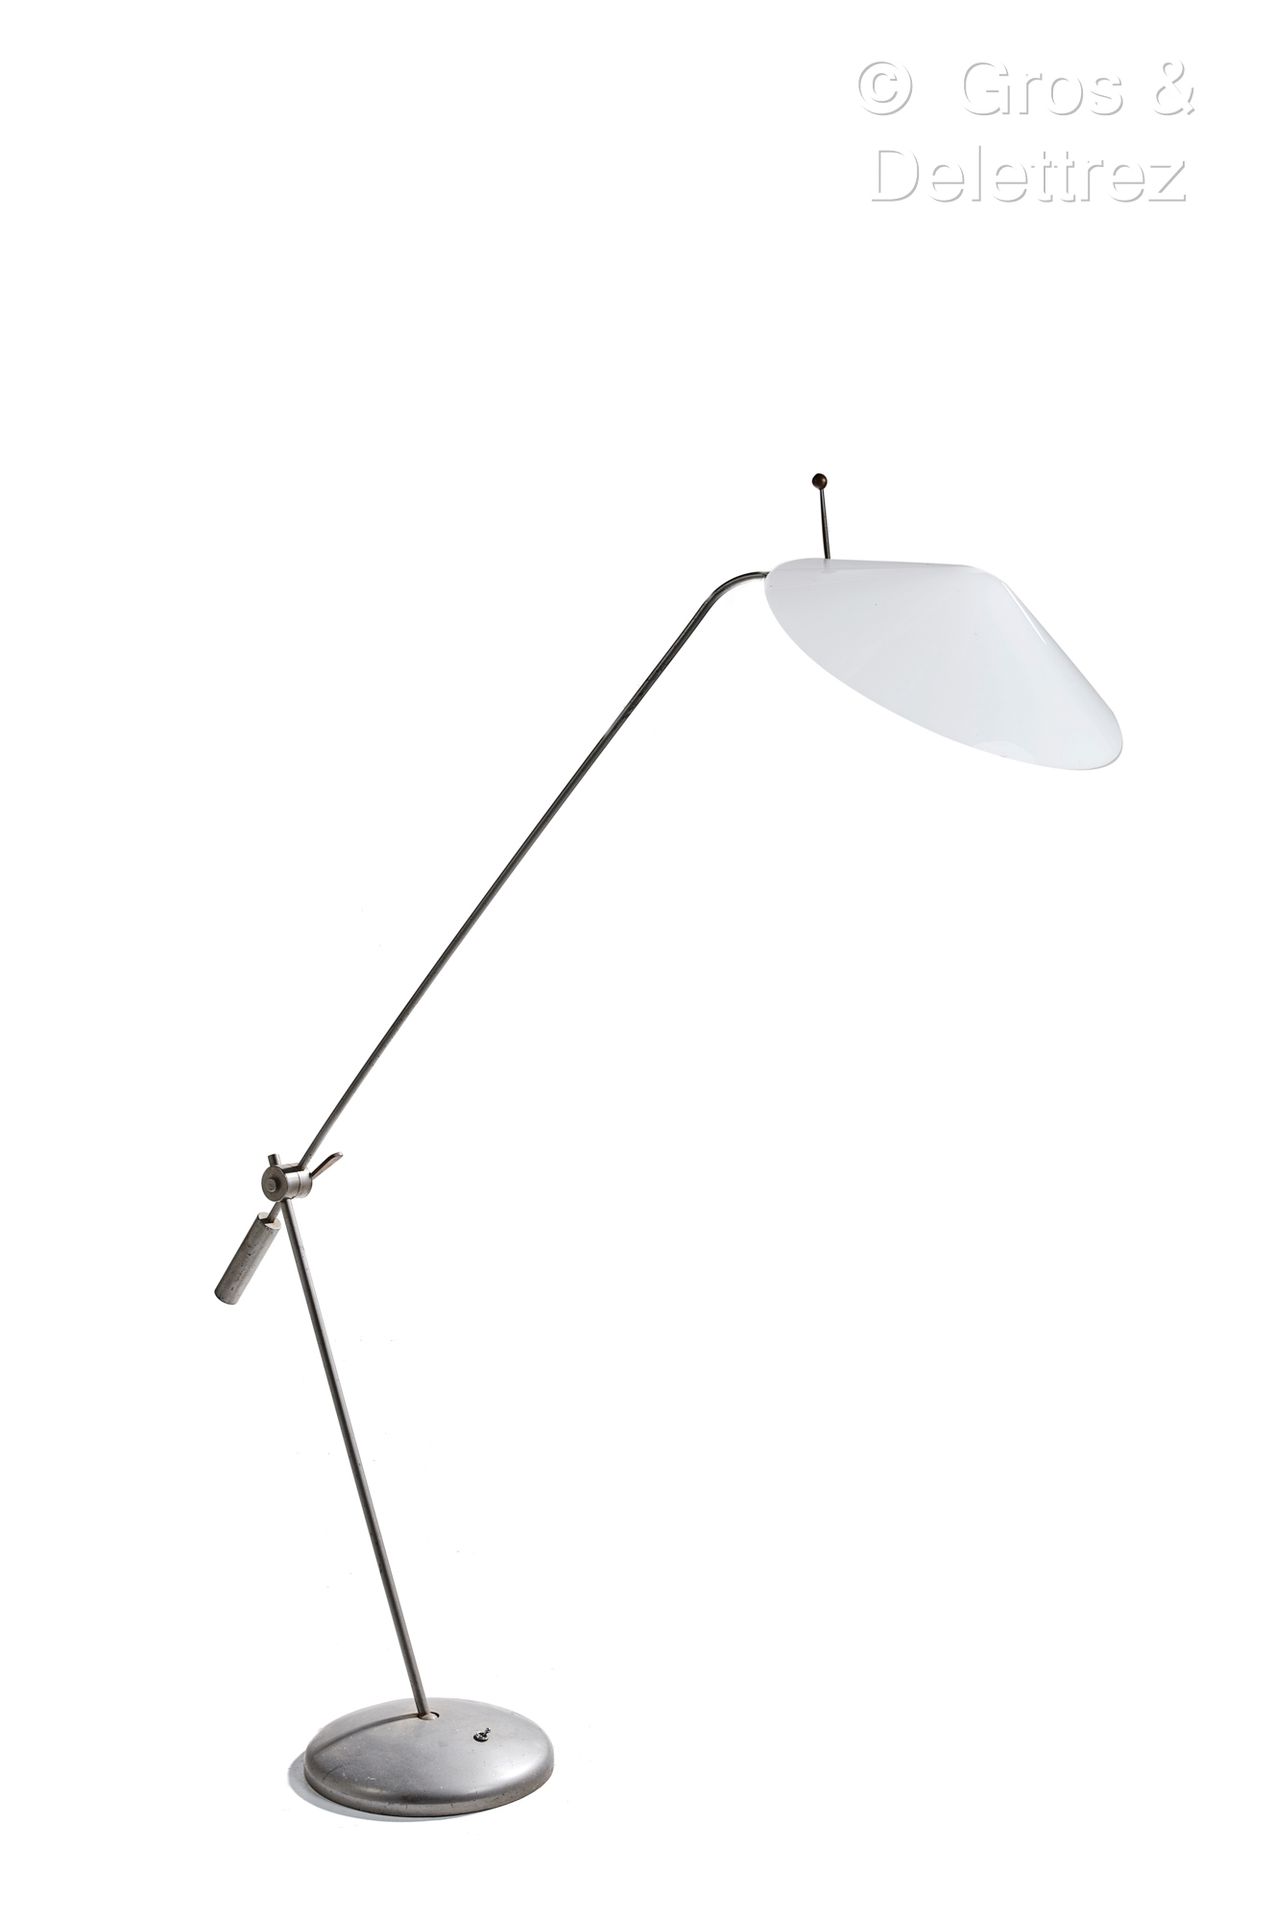 Null Robert MATHIEU (1921-2002)
Floor lamp, base and shaft in gray lacquered met&hellip;